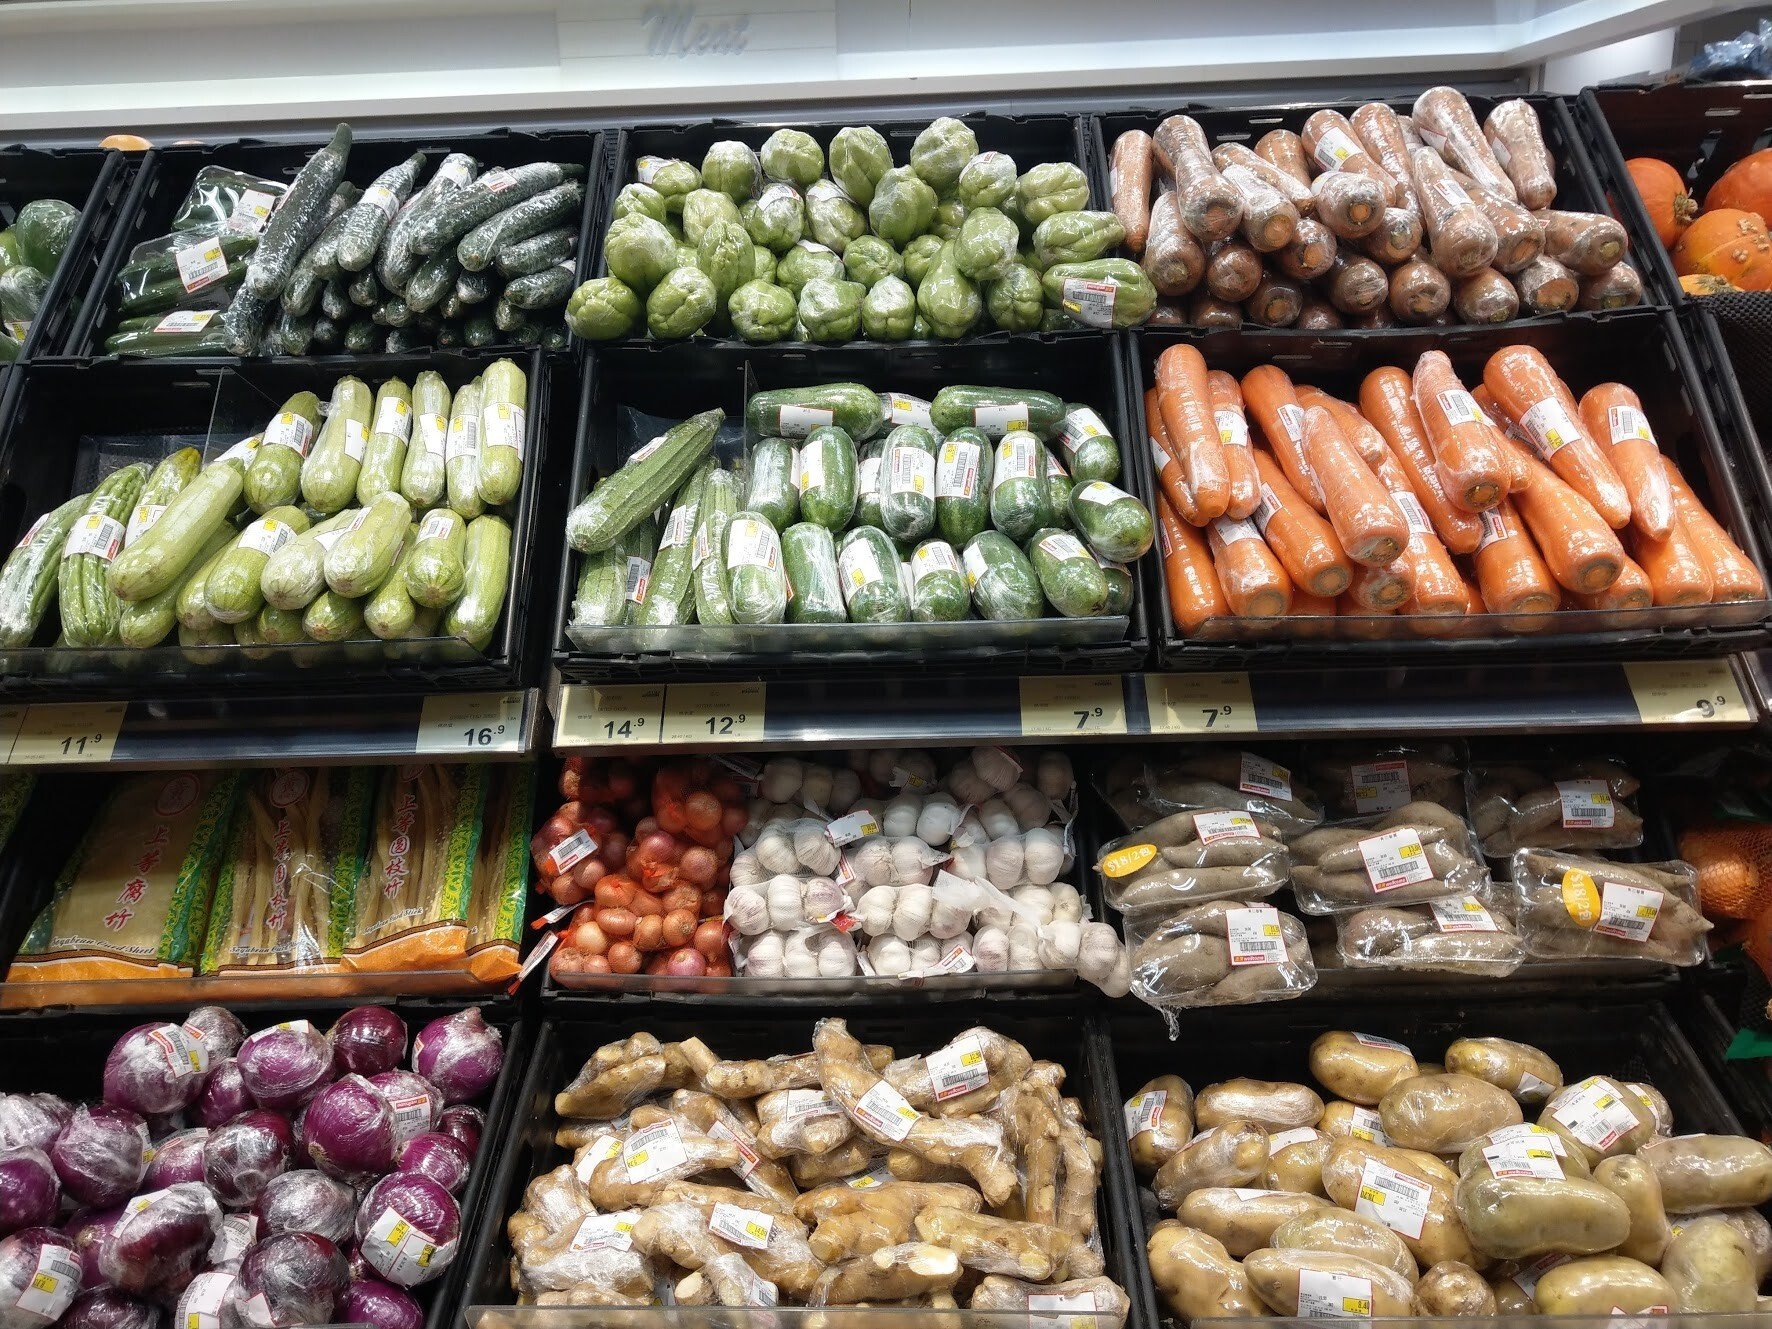 Vegetables individually wrapped in plastic at a supermarket in Hong Kong. Photo: SCMP